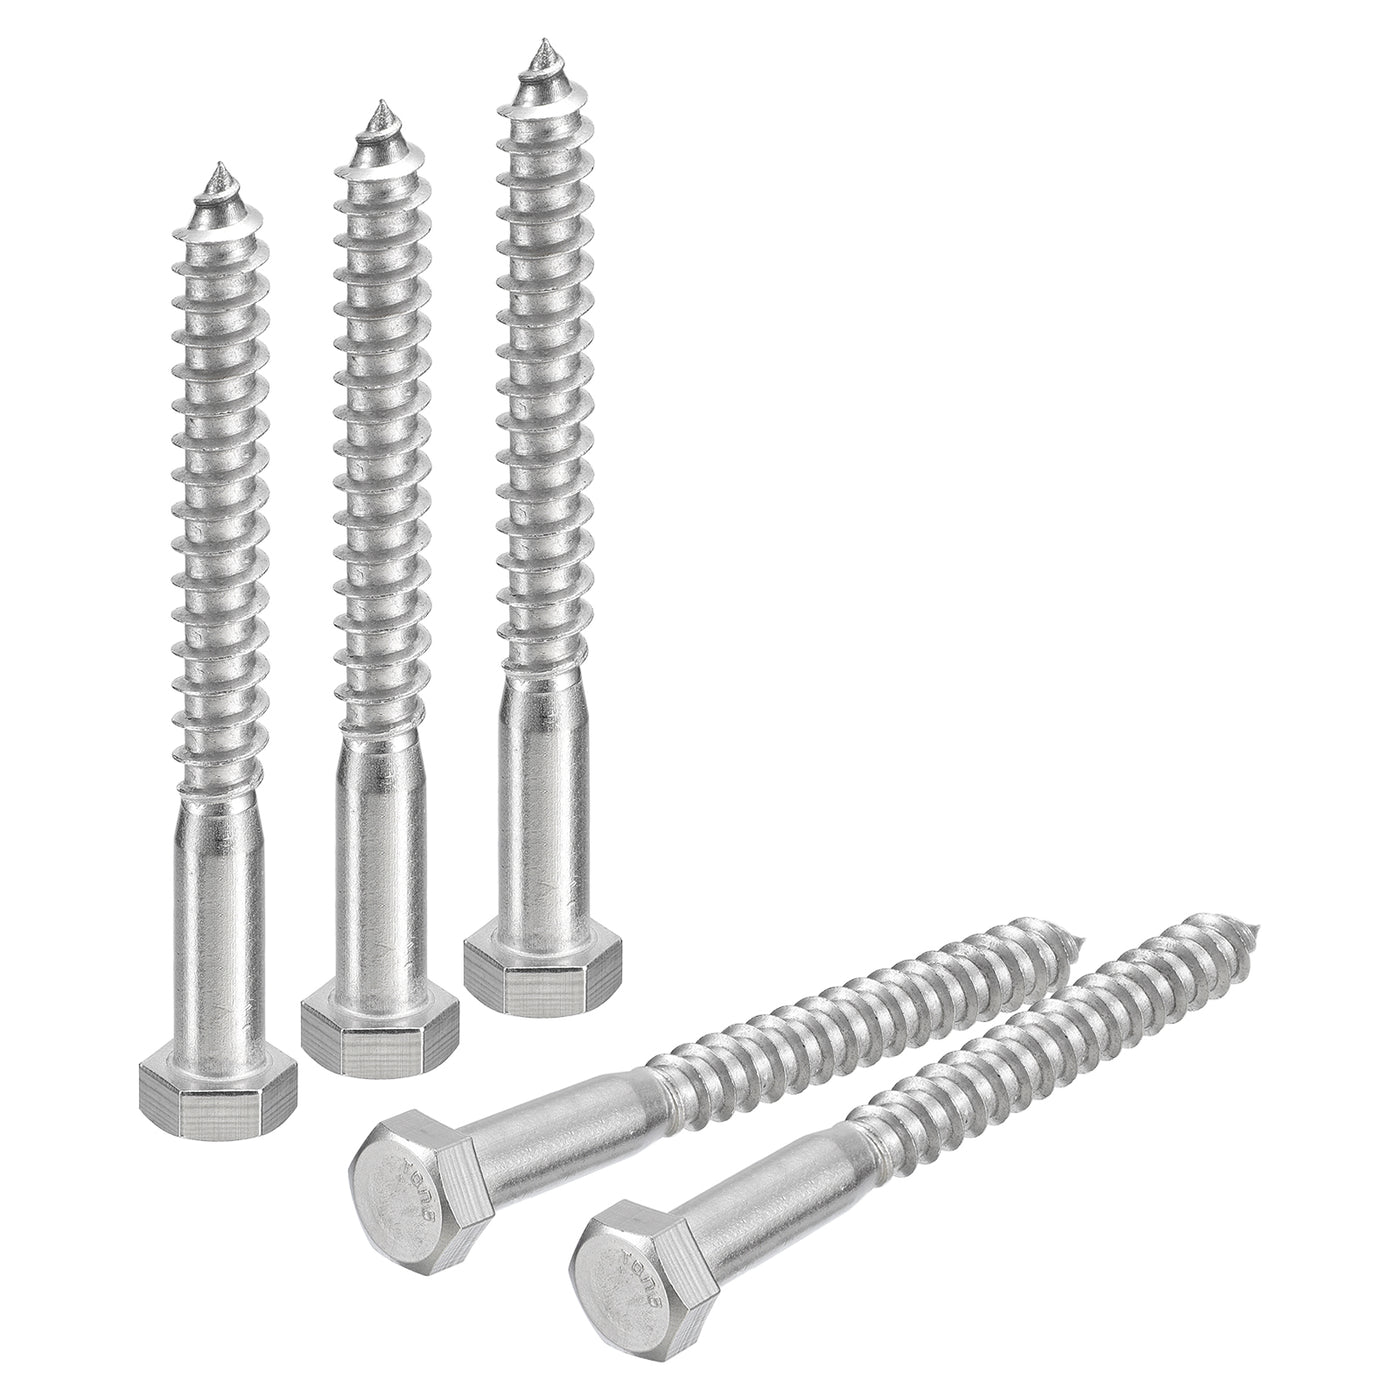 uxcell Uxcell Hex Head Lag Screws Bolts, 10pcs 3/8" x 4" 304 Stainless Steel Wood Screws